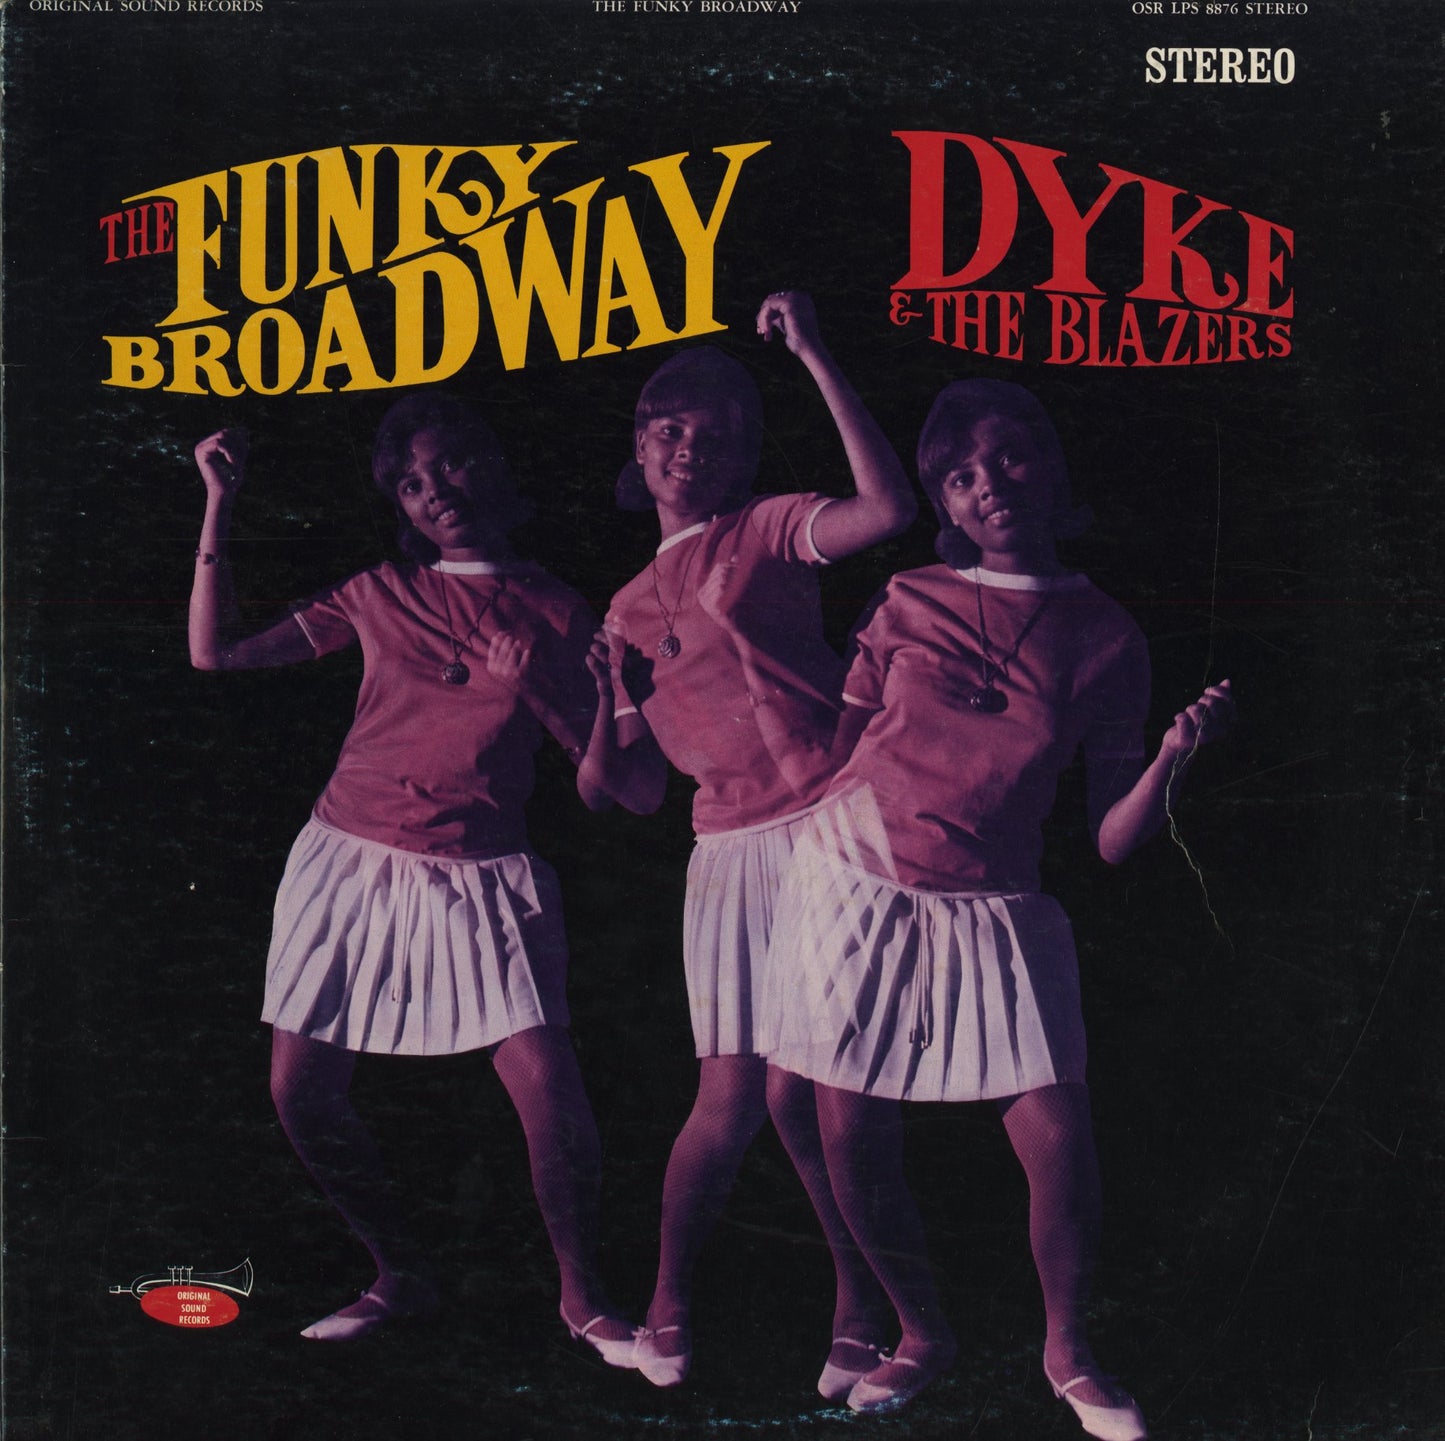 Dyke & The Blazers / ダイク＆ザ・ブレイザーズ / The Funky Broadway (OSR LP 8876)